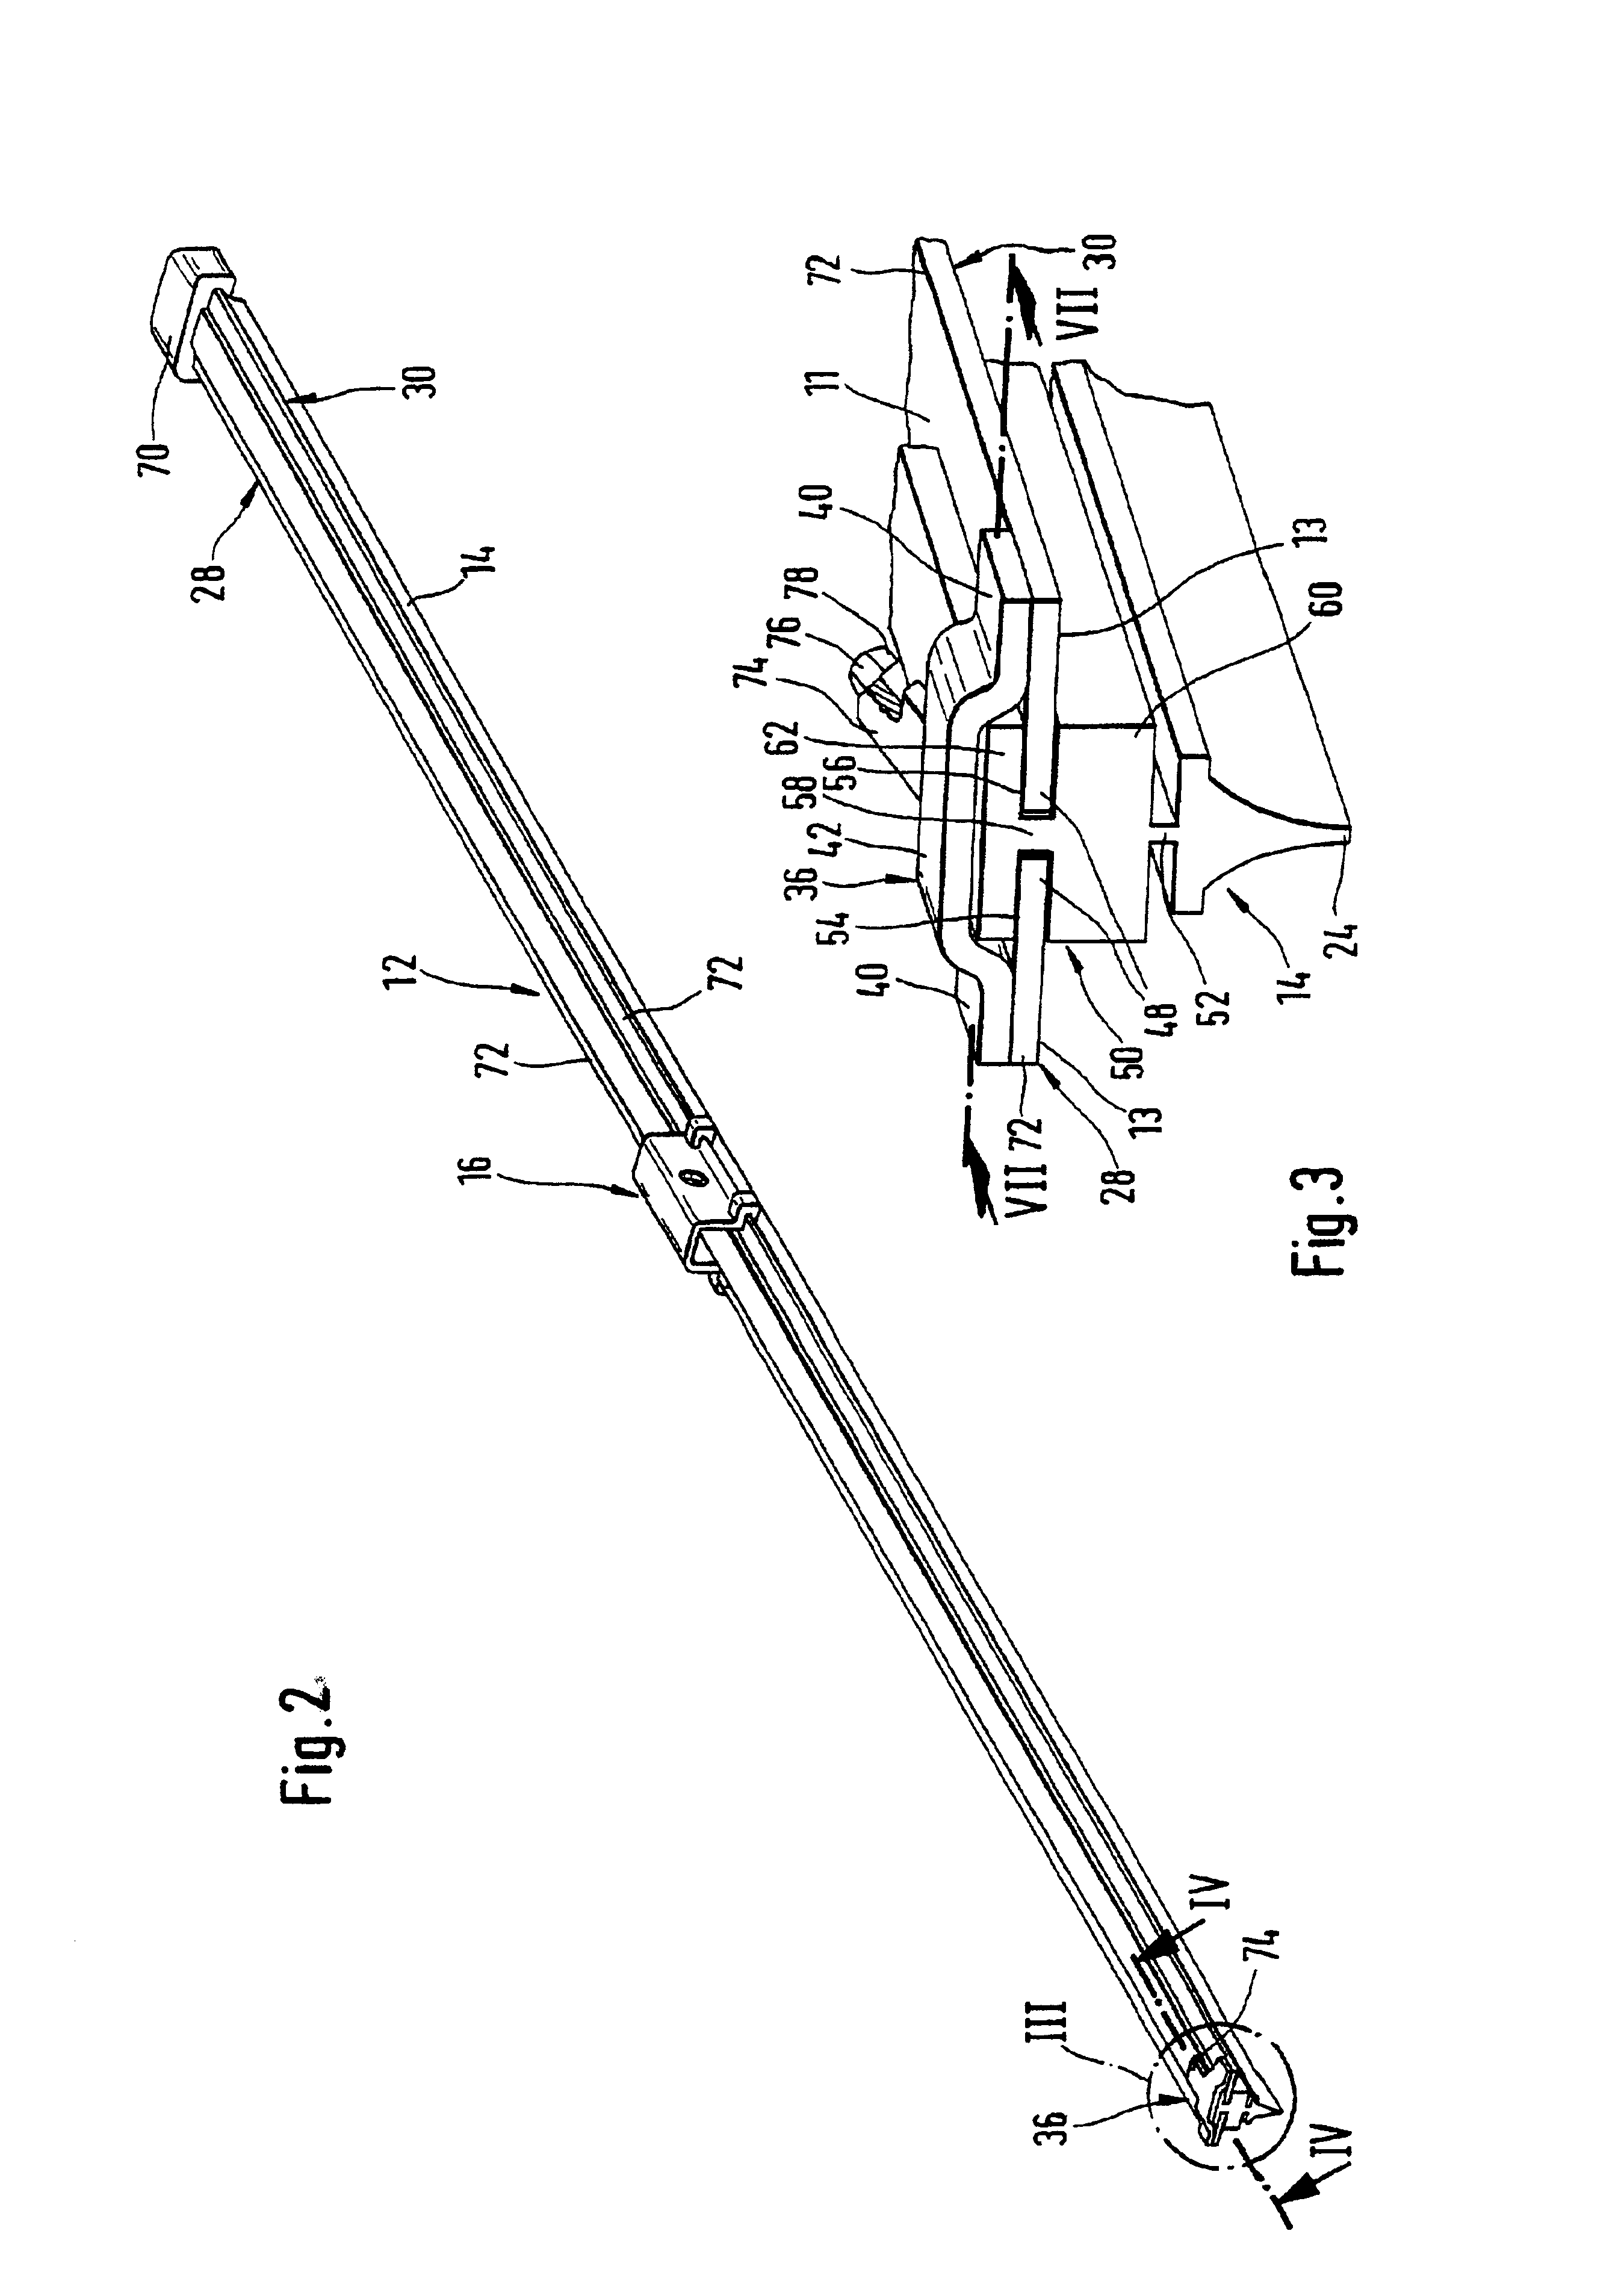 Wiper blade with wiper strip to carrier element attachment means